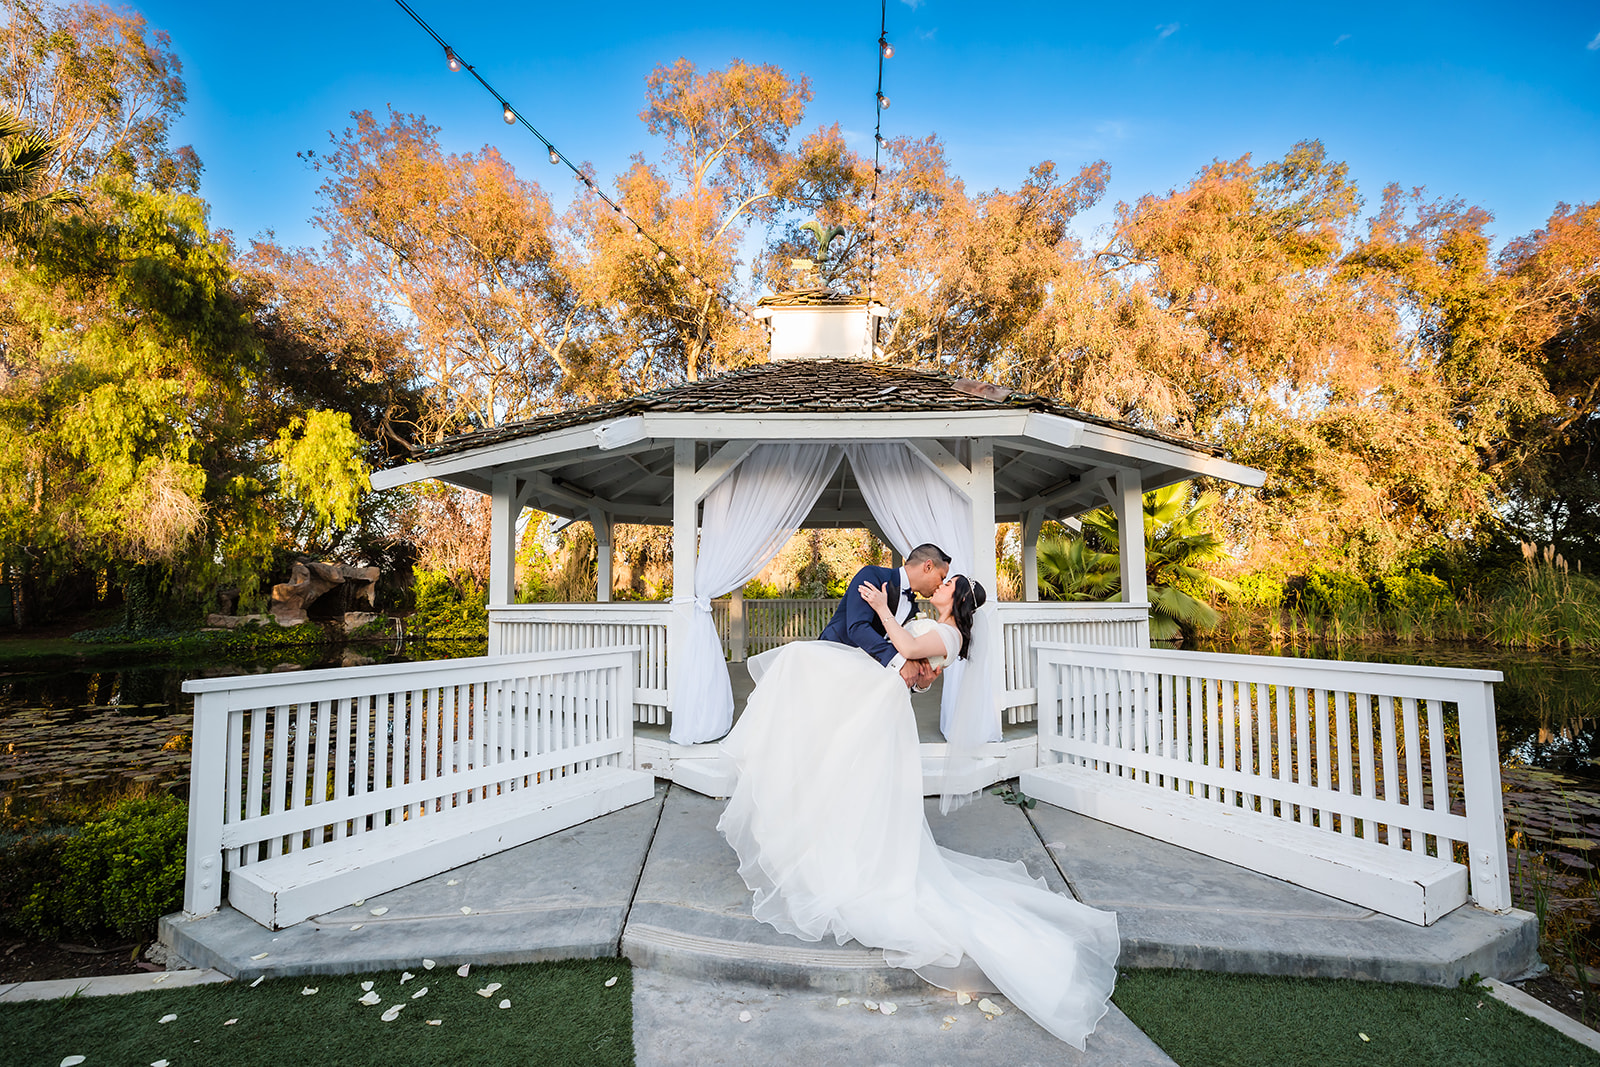 Groom dips his bride for a kiss in front of the gazebo at The Orchard by Wedgewood weddings in Menifee, CA